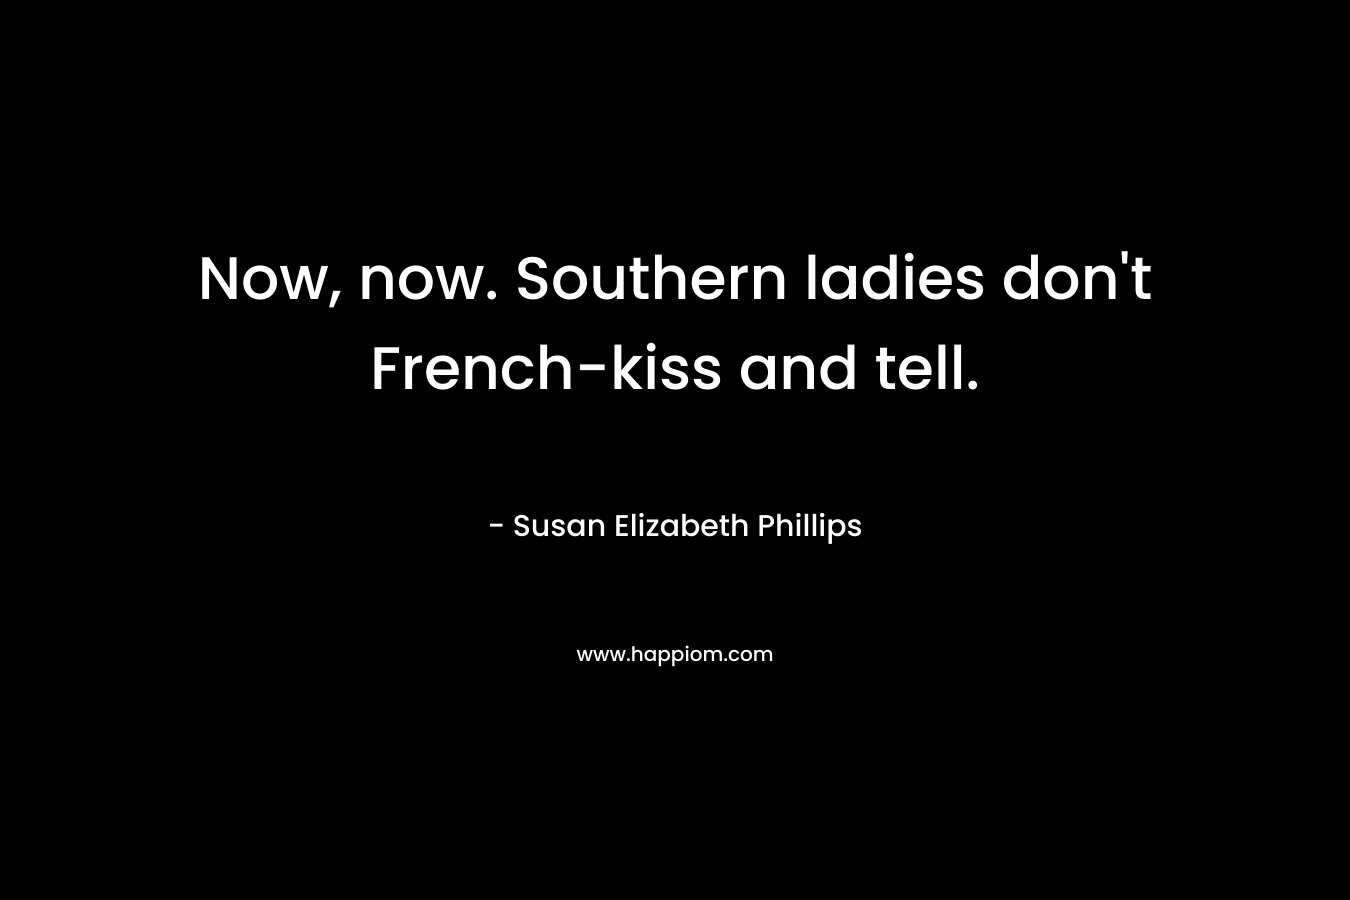 Now, now. Southern ladies don't French-kiss and tell.